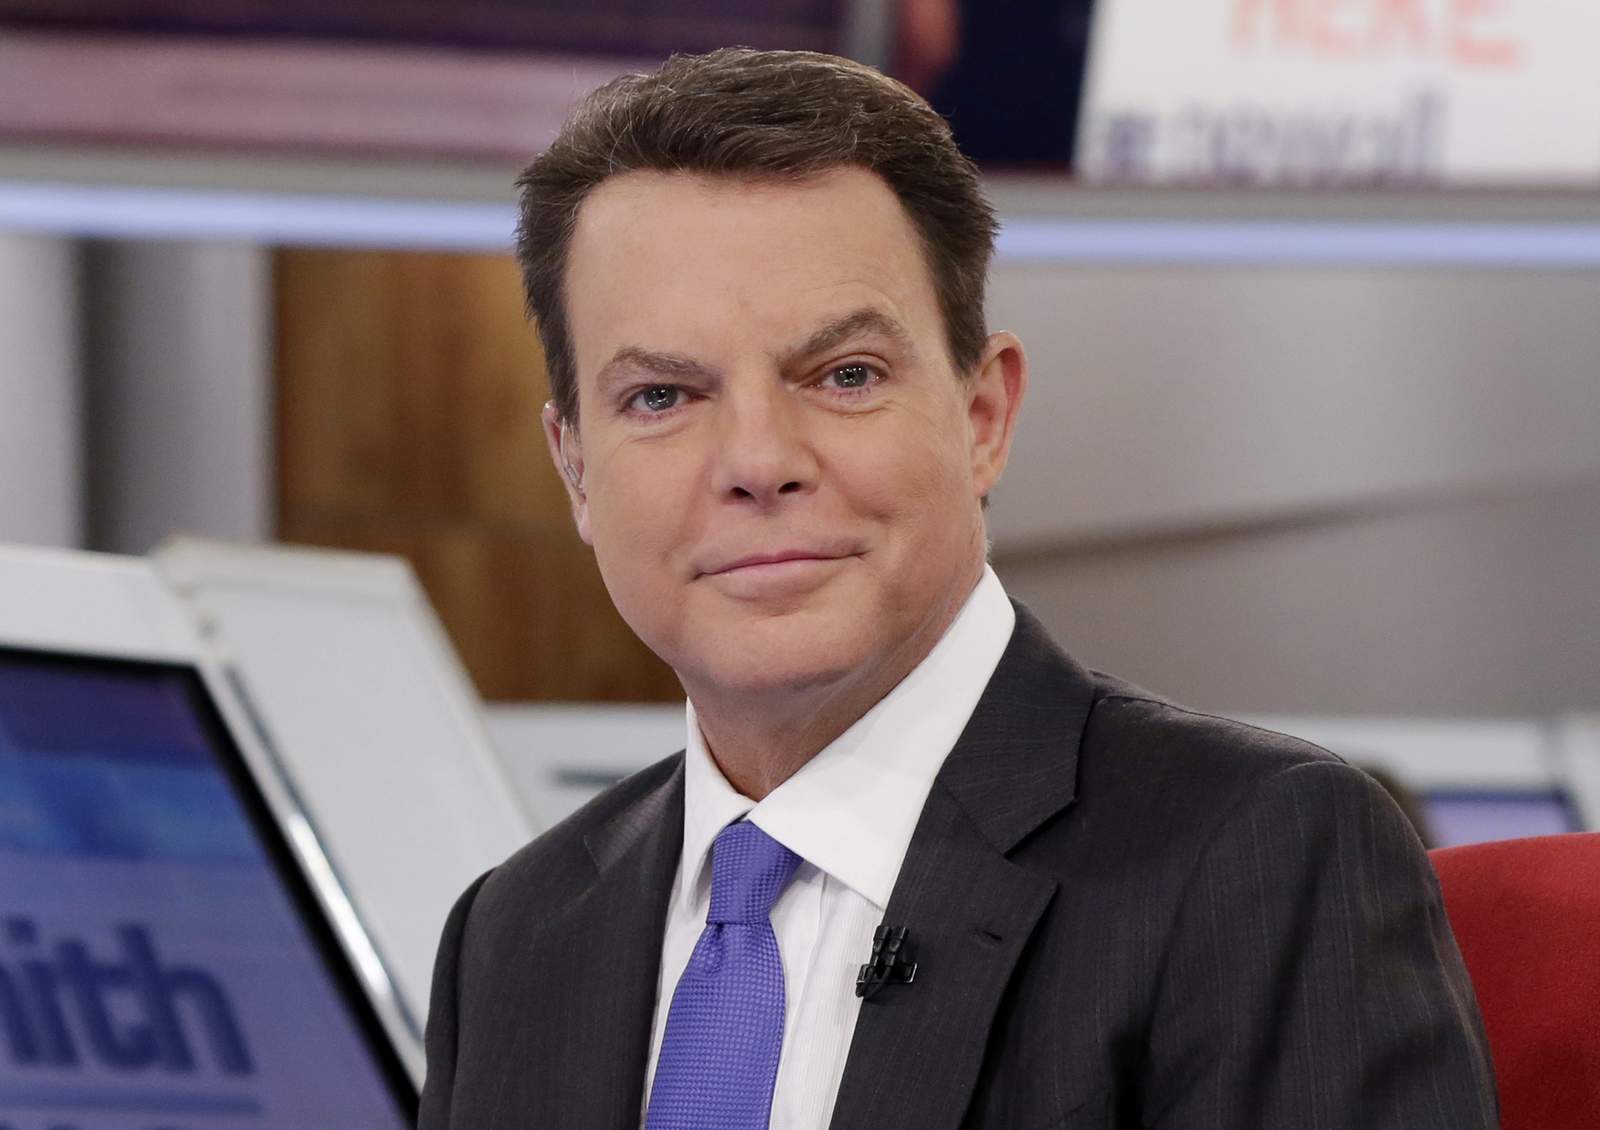 Nearly a year after sudden exit, Shepard Smith returns to TV